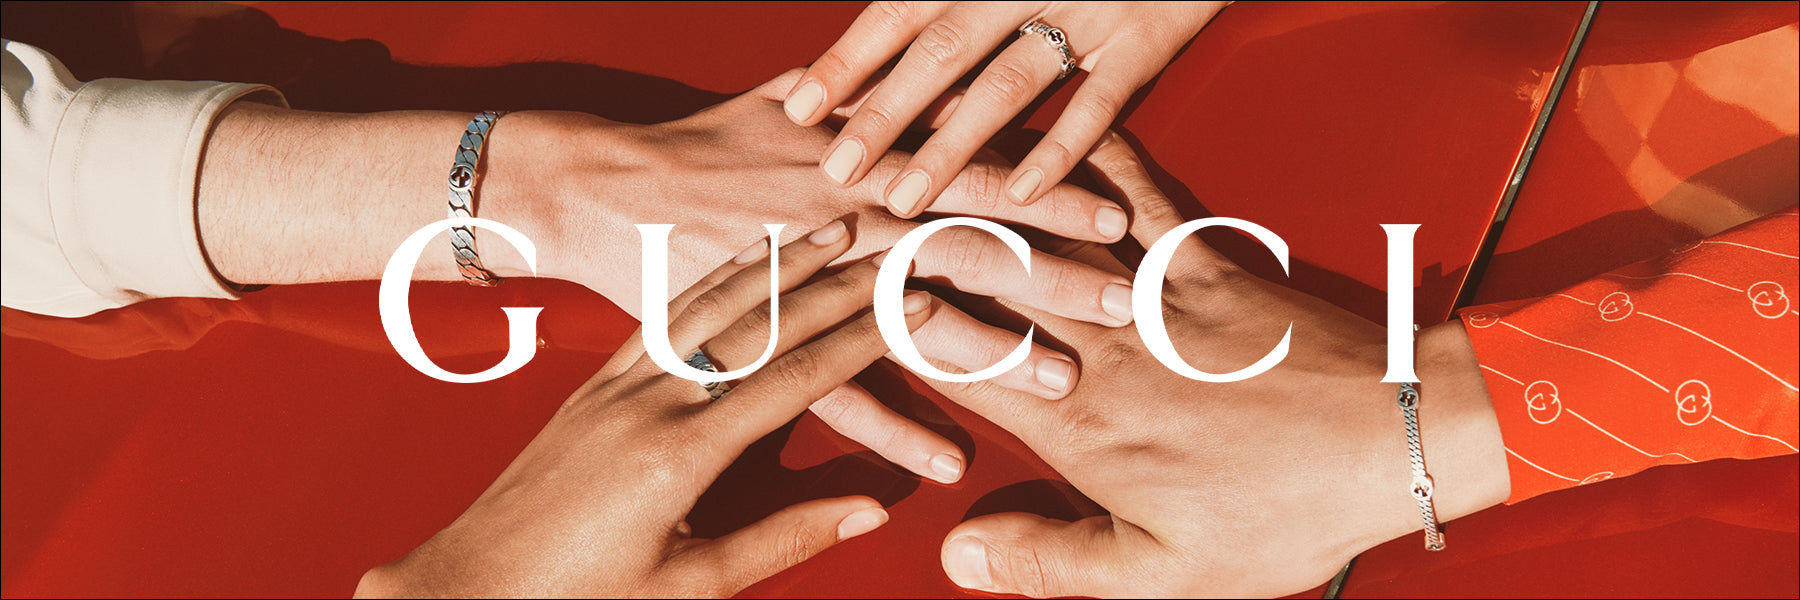 Gucci Blind for Love Image